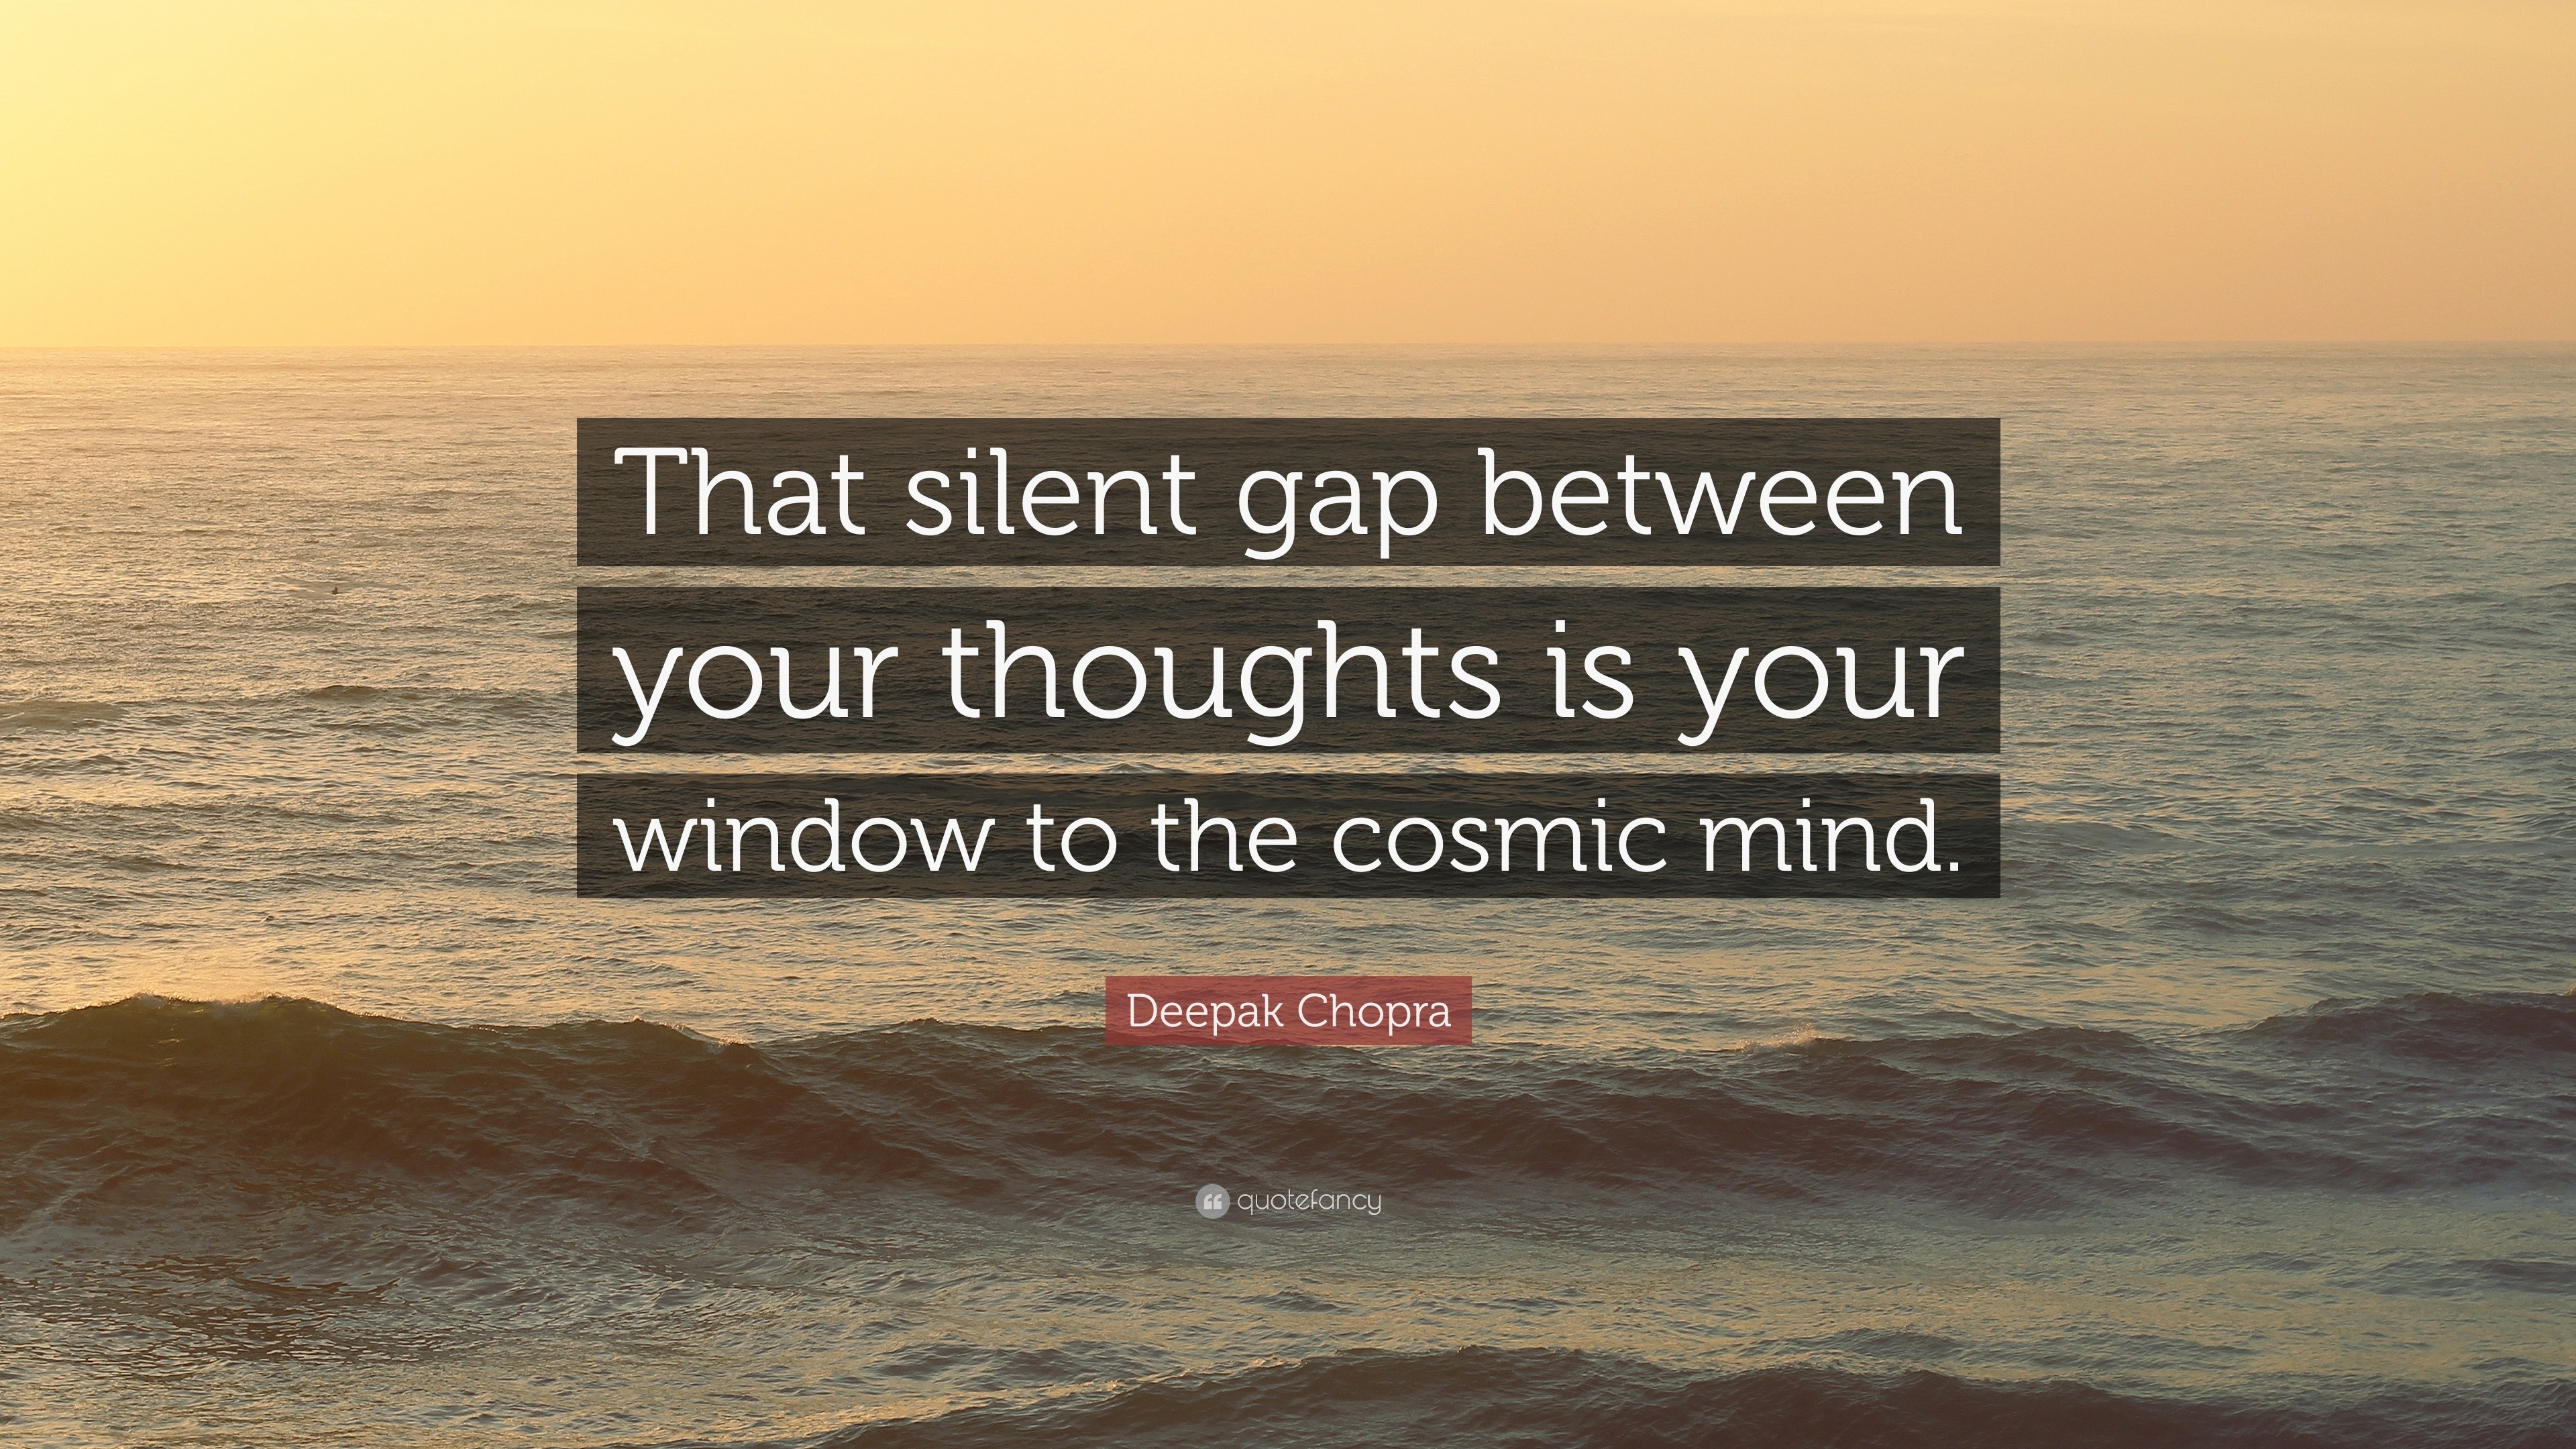 Deepak Chopra Quote: “That silent gap between your thoughts is your ...